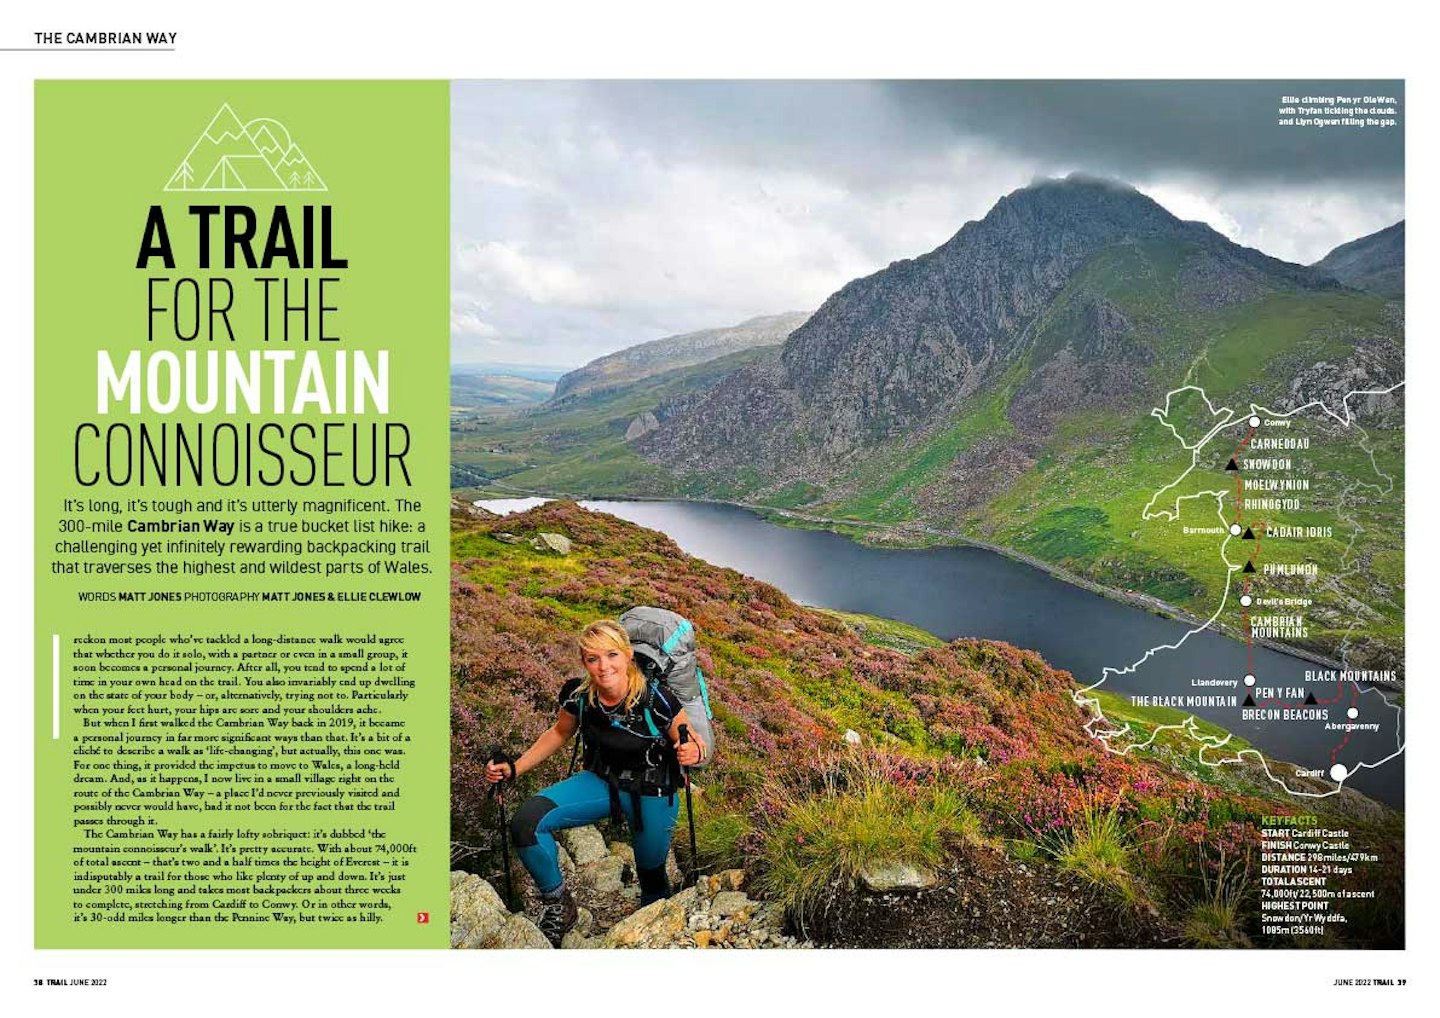 Trail magazine article - A trail for the mountain connoisseur